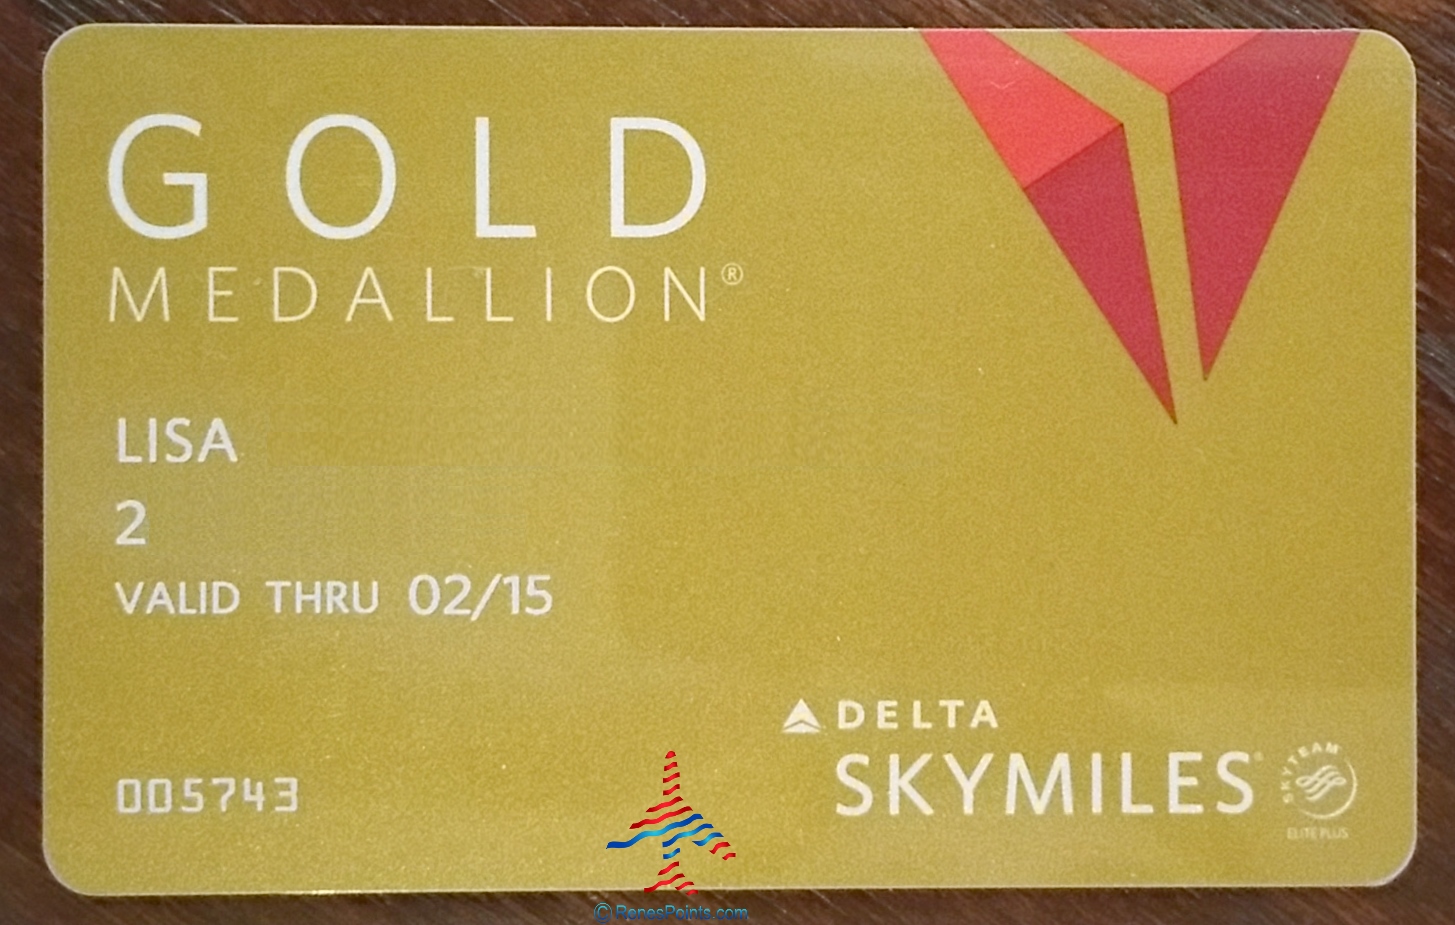 real delta gold medallion card renes points blog Eye of the Flyer